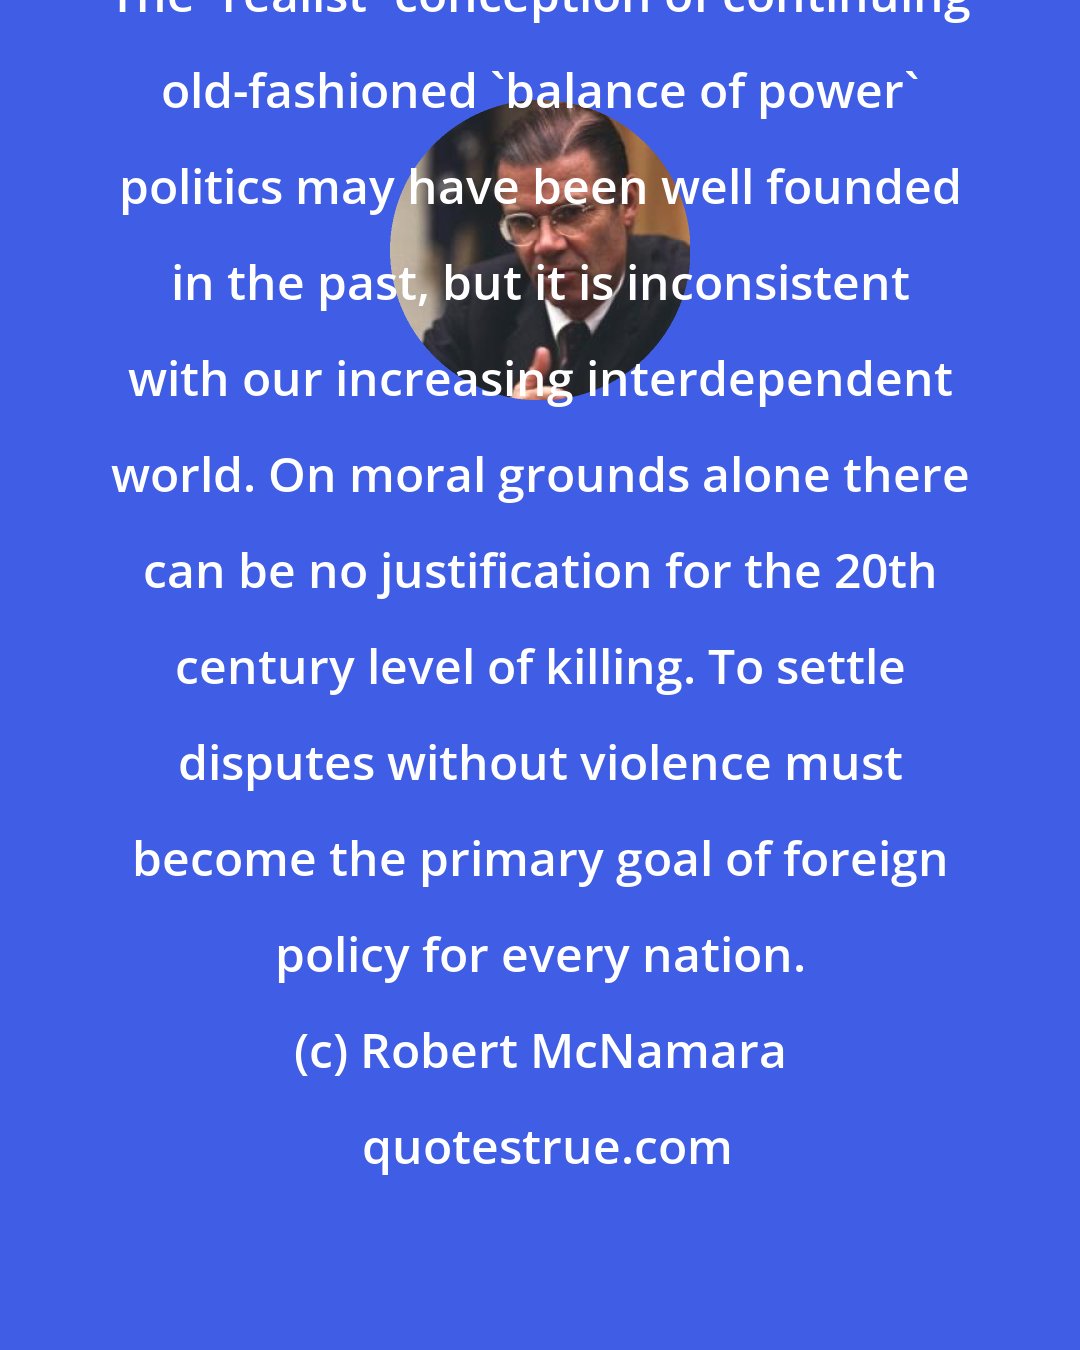 Robert McNamara: The 'realist' conception of continuing old-fashioned 'balance of power' politics may have been well founded in the past, but it is inconsistent with our increasing interdependent world. On moral grounds alone there can be no justification for the 20th century level of killing. To settle disputes without violence must become the primary goal of foreign policy for every nation.